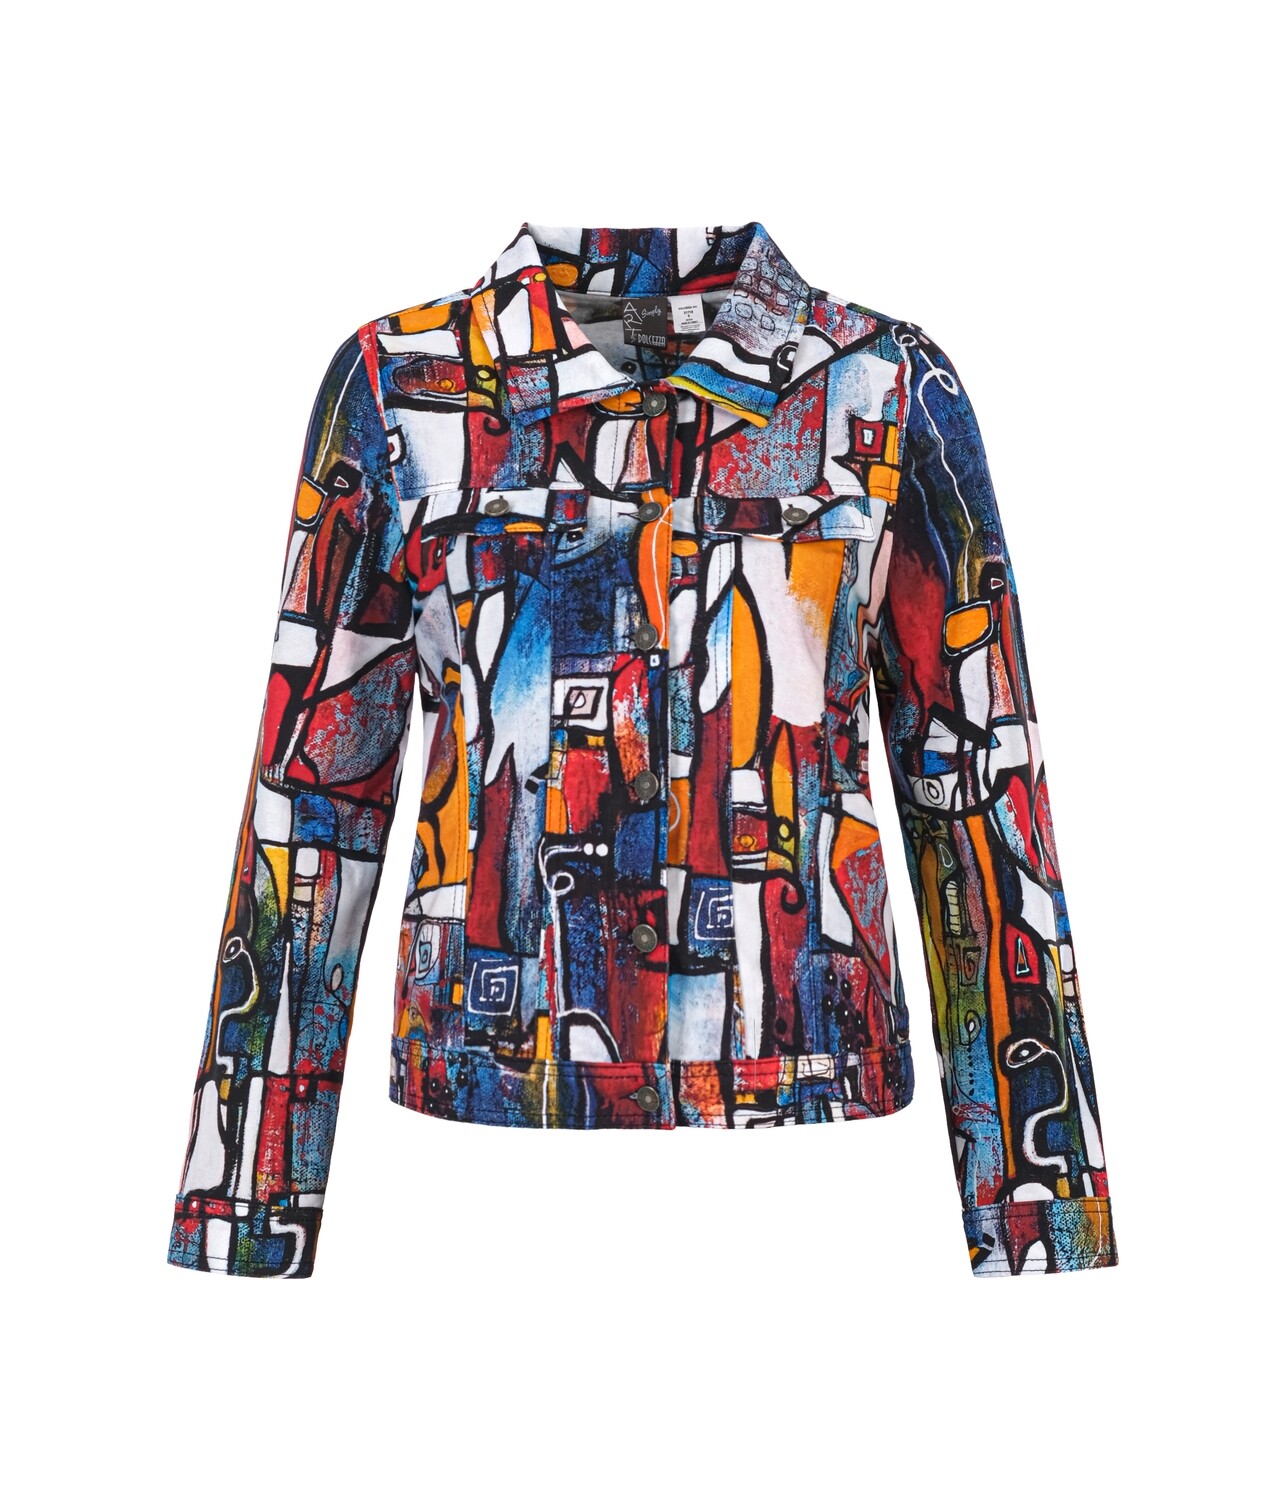 Simply Art Dolcezza: It's Complicated Crazy Cool Abstract Art Soft Denim Jacket